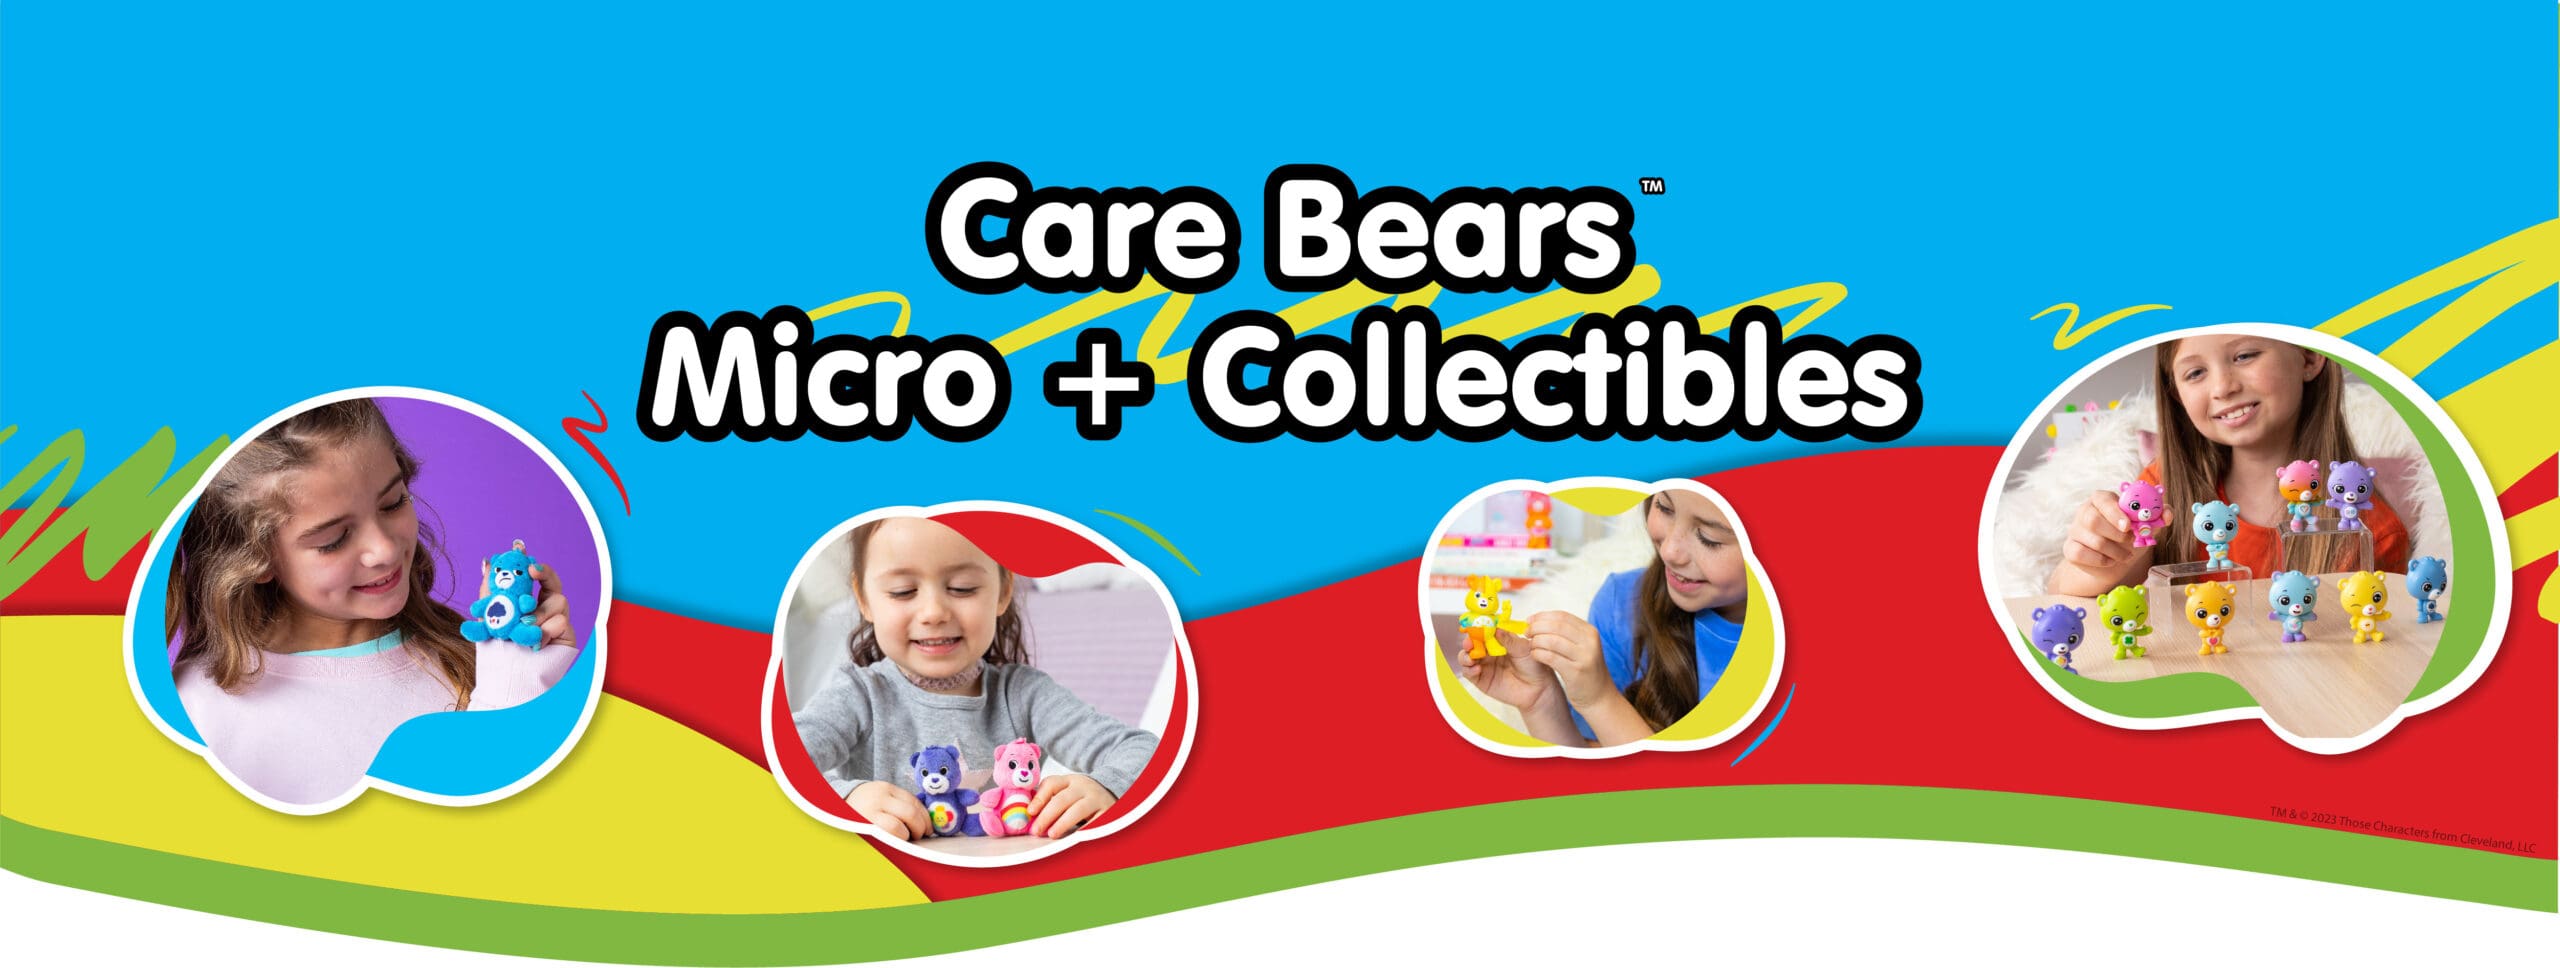 Care Bears Micro + Collectibles